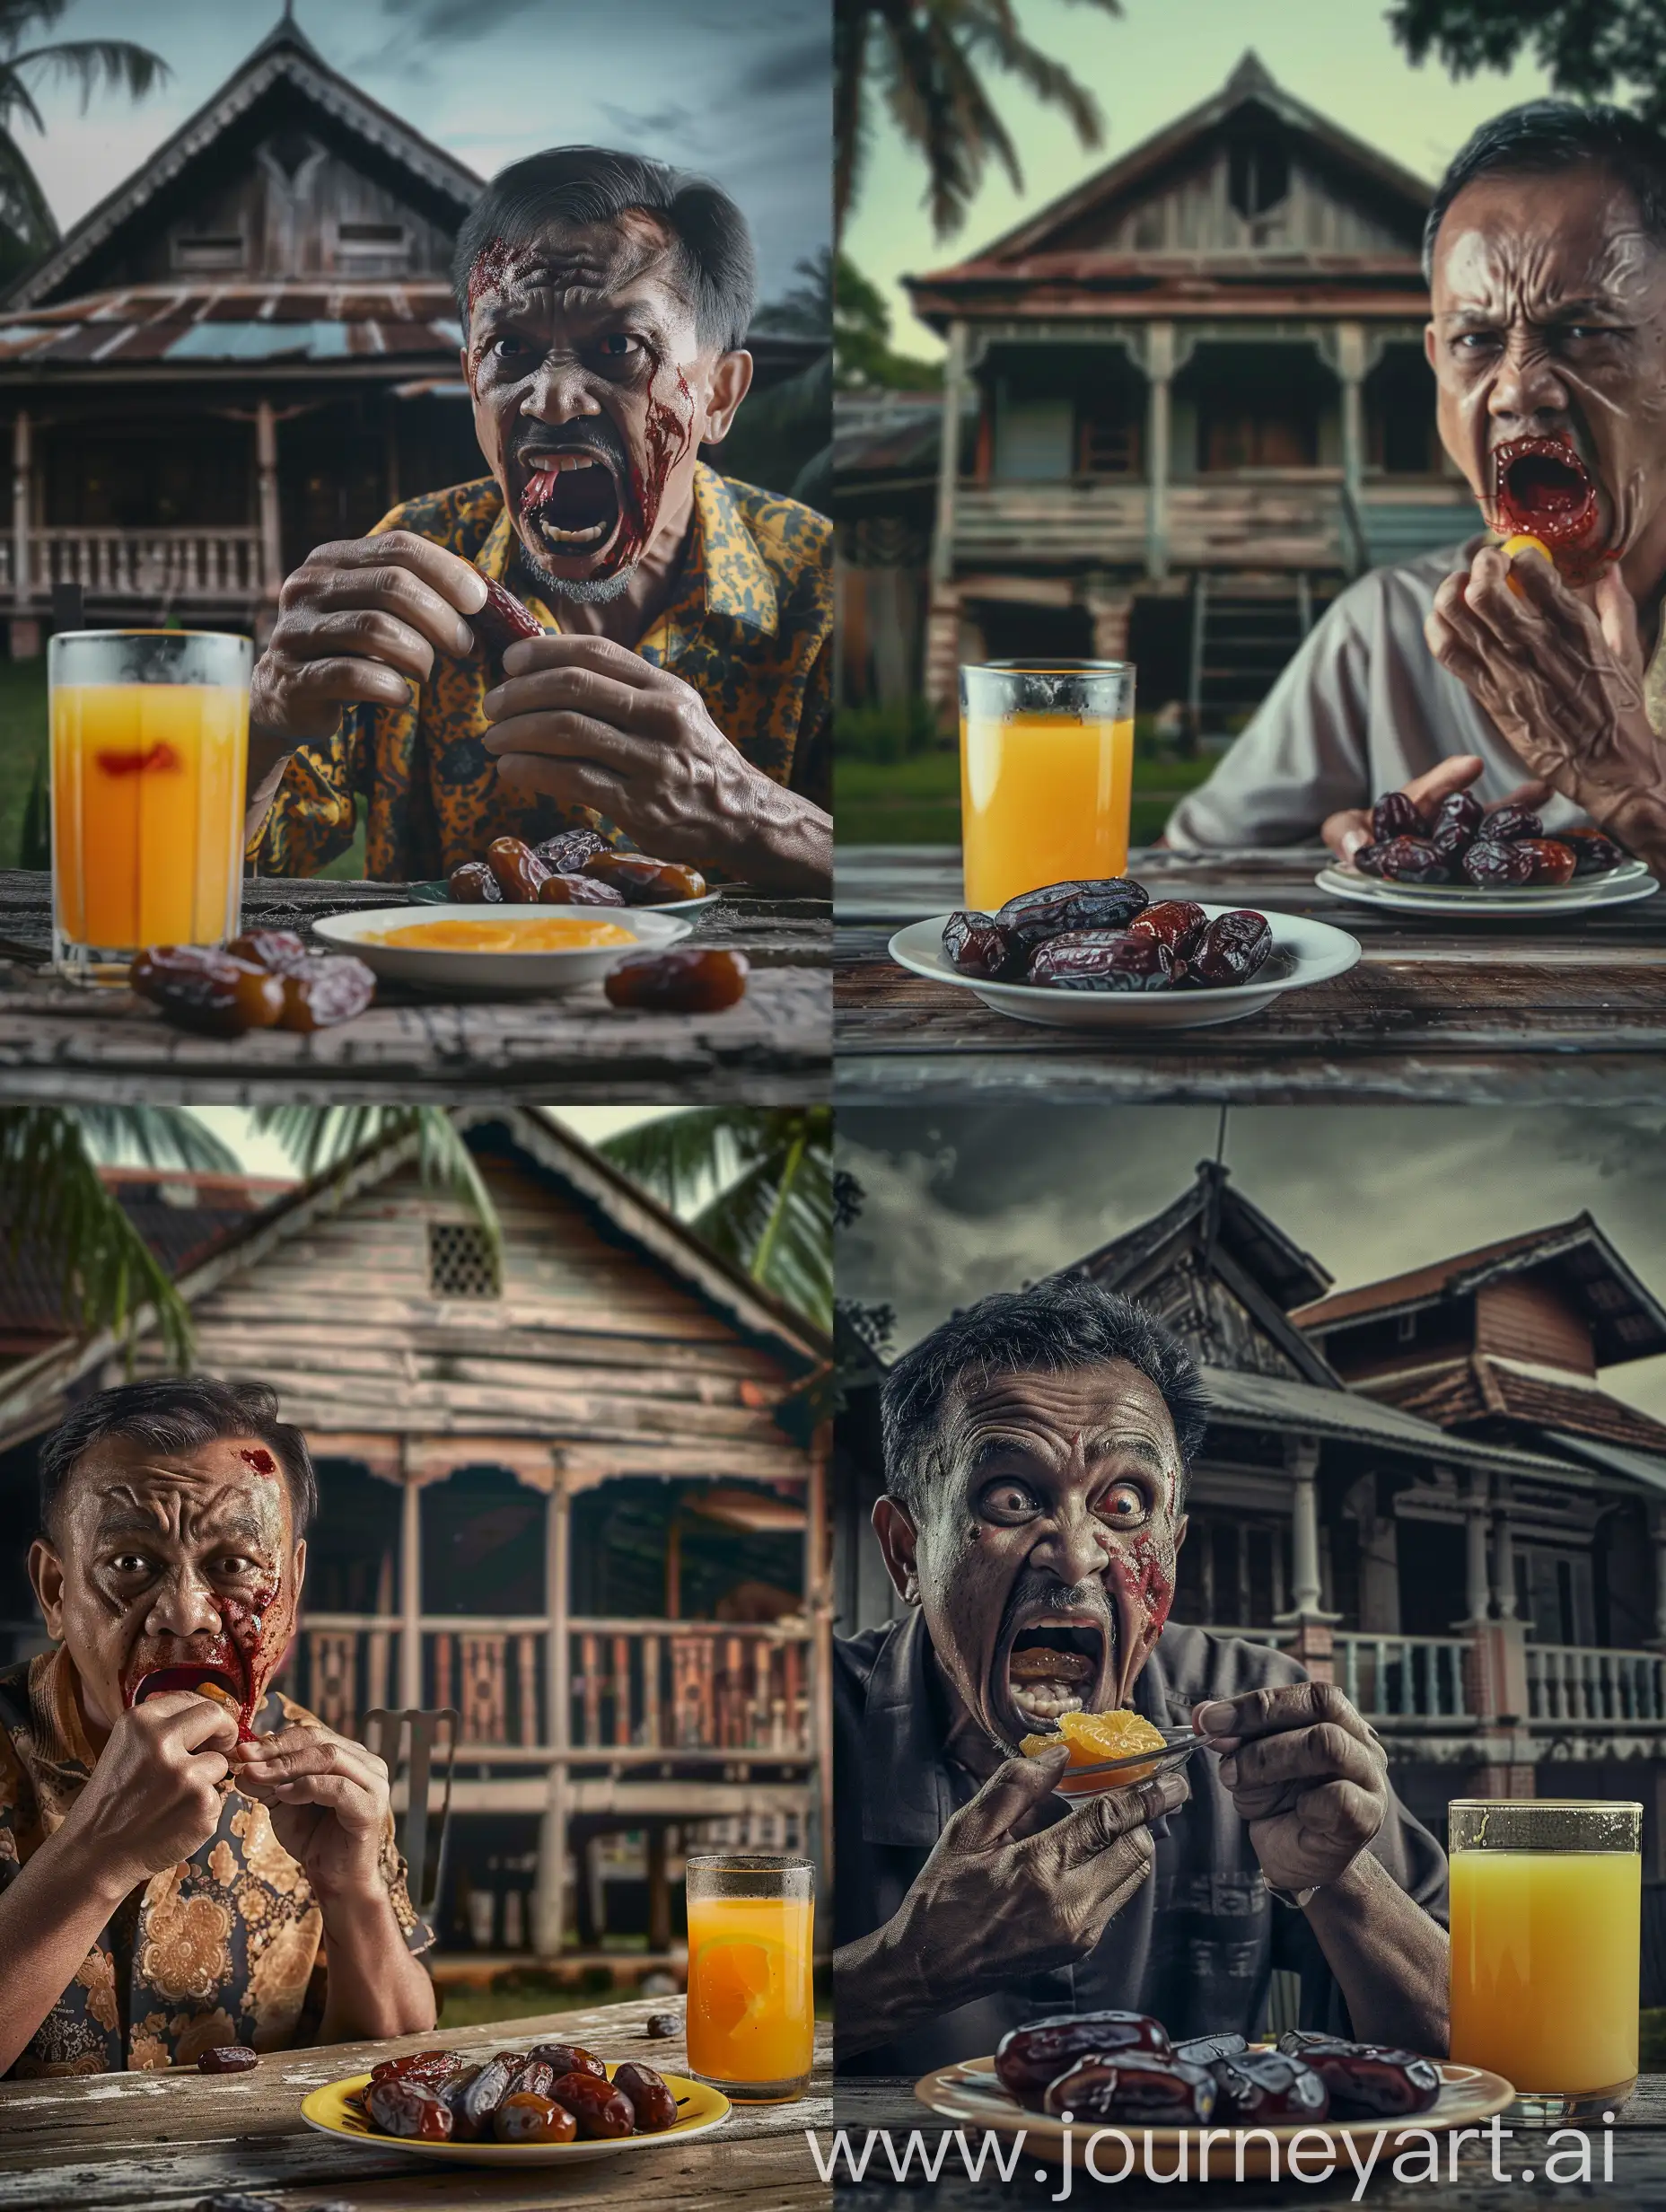 ultra realistic. a Malay man is eating a date. his mouth was bleeding. in front of him is a glass of orange juice and a plate of dates. the background of an old malay house. canon eos-id x mark iii dslr --v 6.0